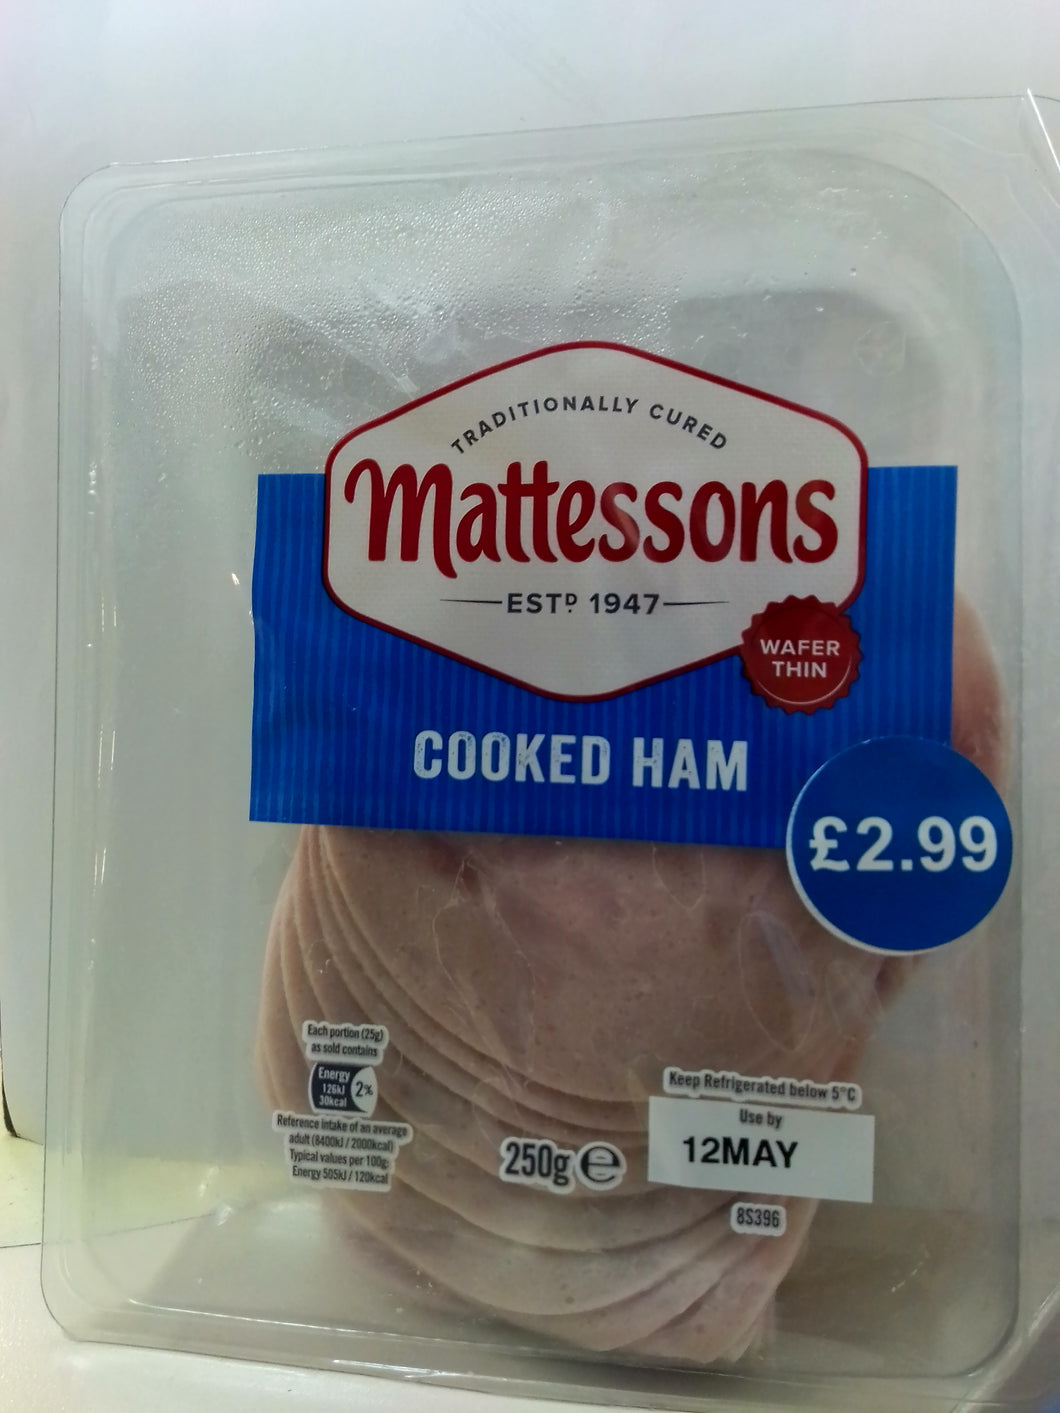 Mattessons cooked ham